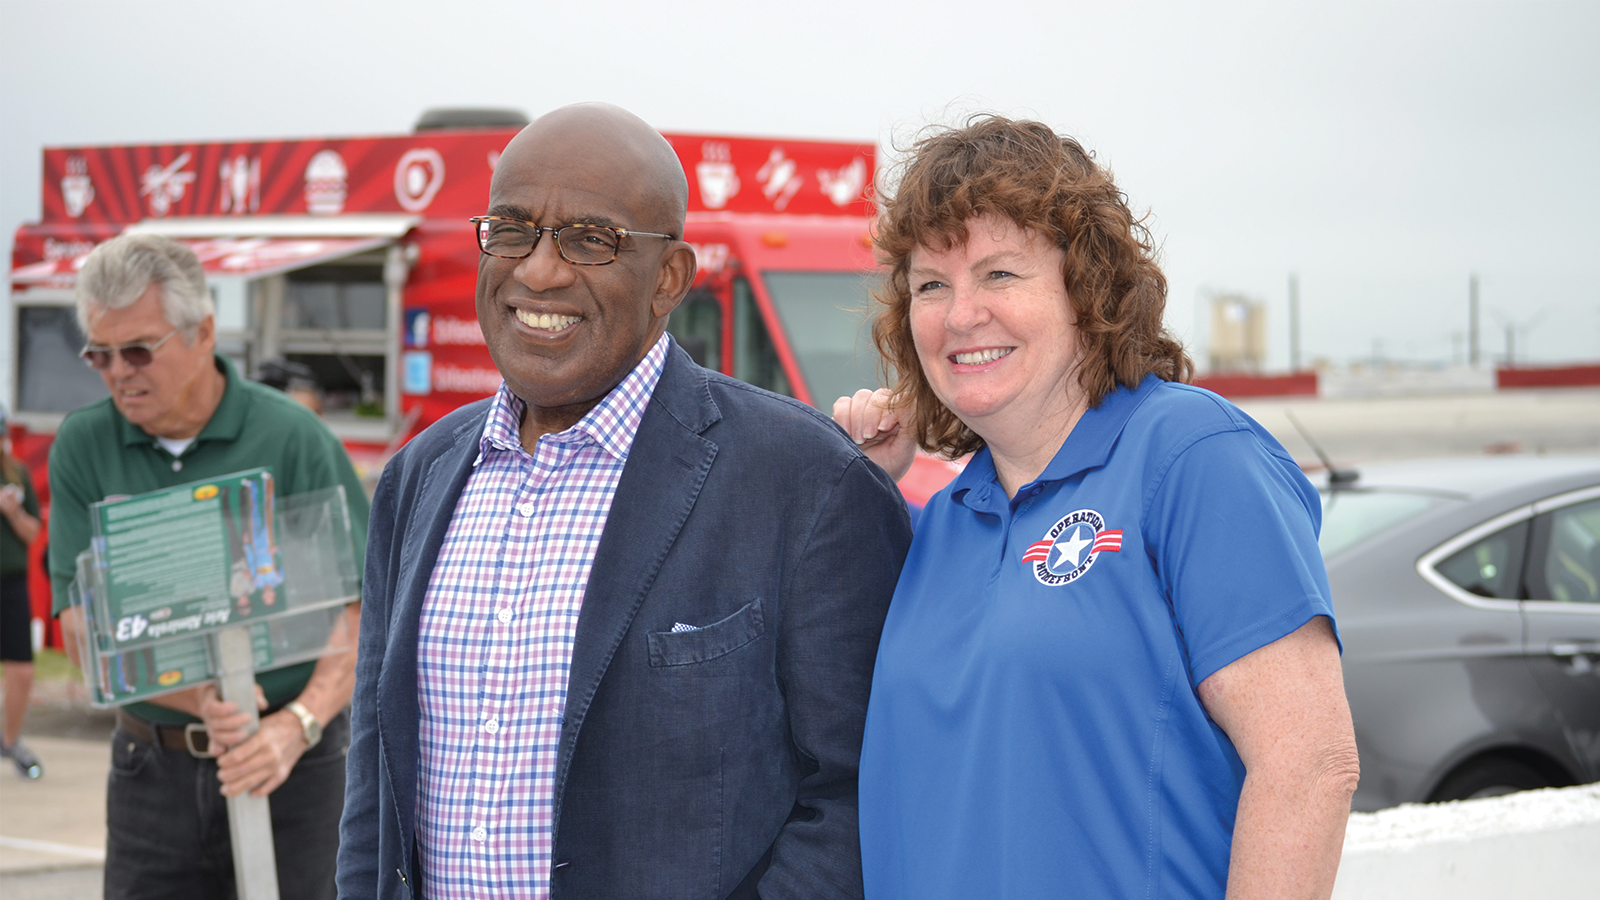 Judy trevin and Al rocker at an event to serve military families